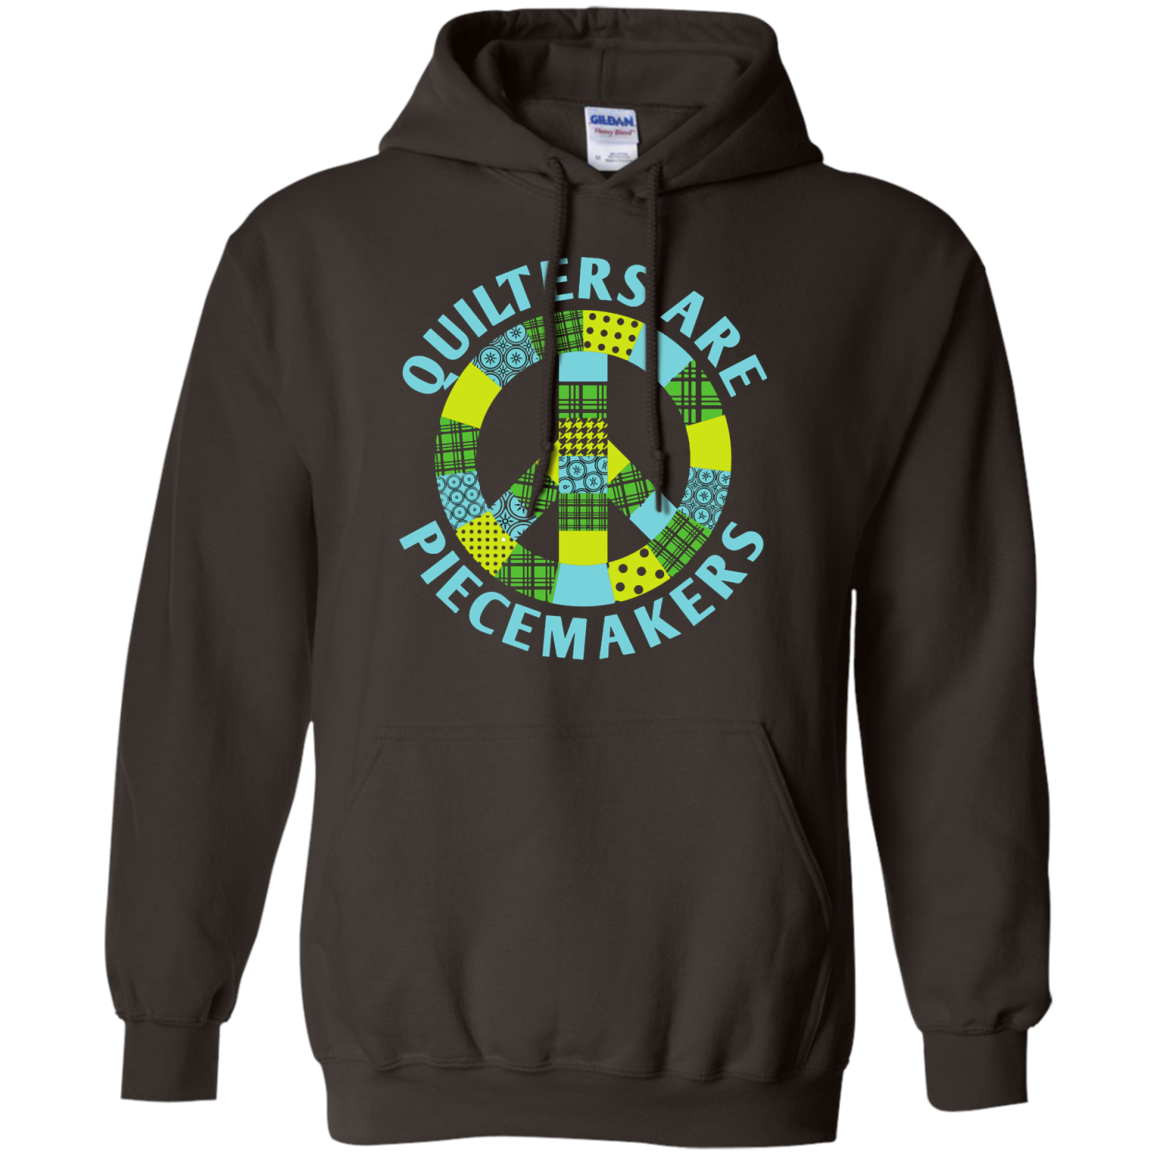 Quilters are Piecemakers Pullover Hoodies - Crafter4Life - 4